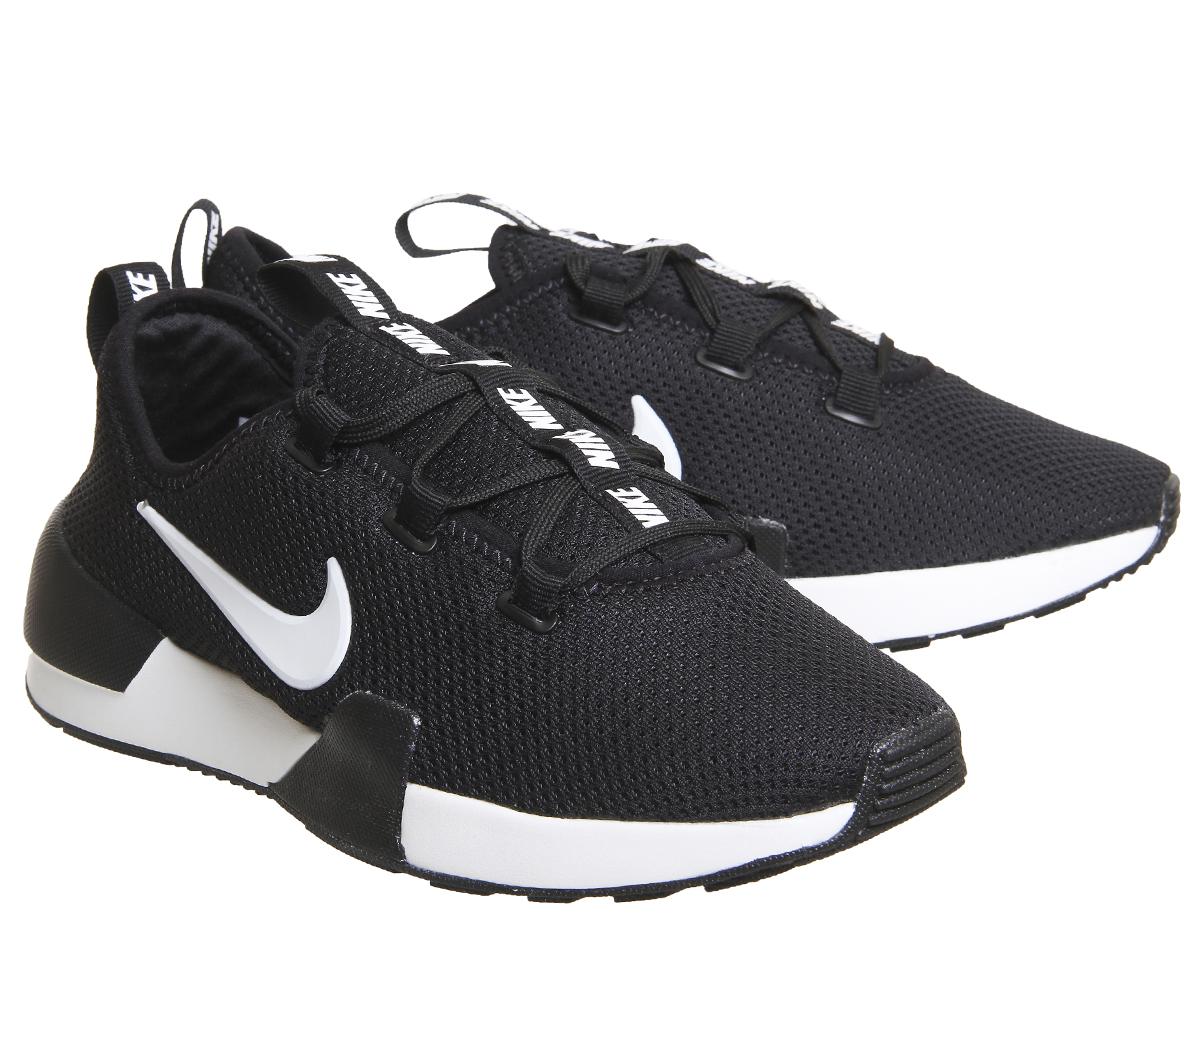 Nike Ashin Trainers Black Online Sale, UP TO 60% OFF